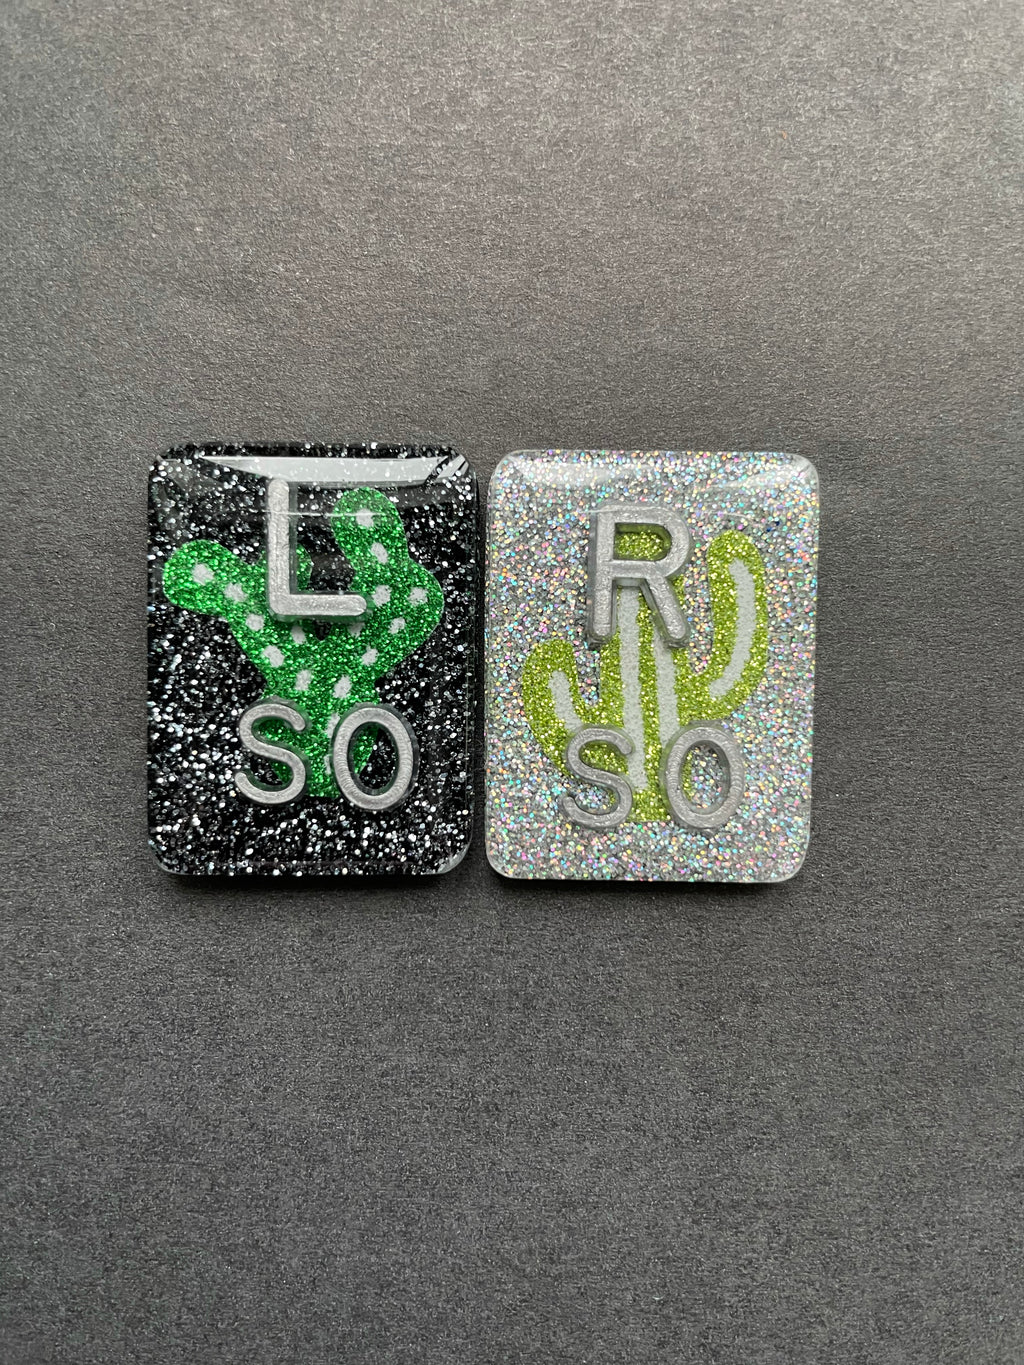 Succulent Xray Markers, Cactus Xray Markers, Plants, Green, 3 Initials, Glitter, Rectangle